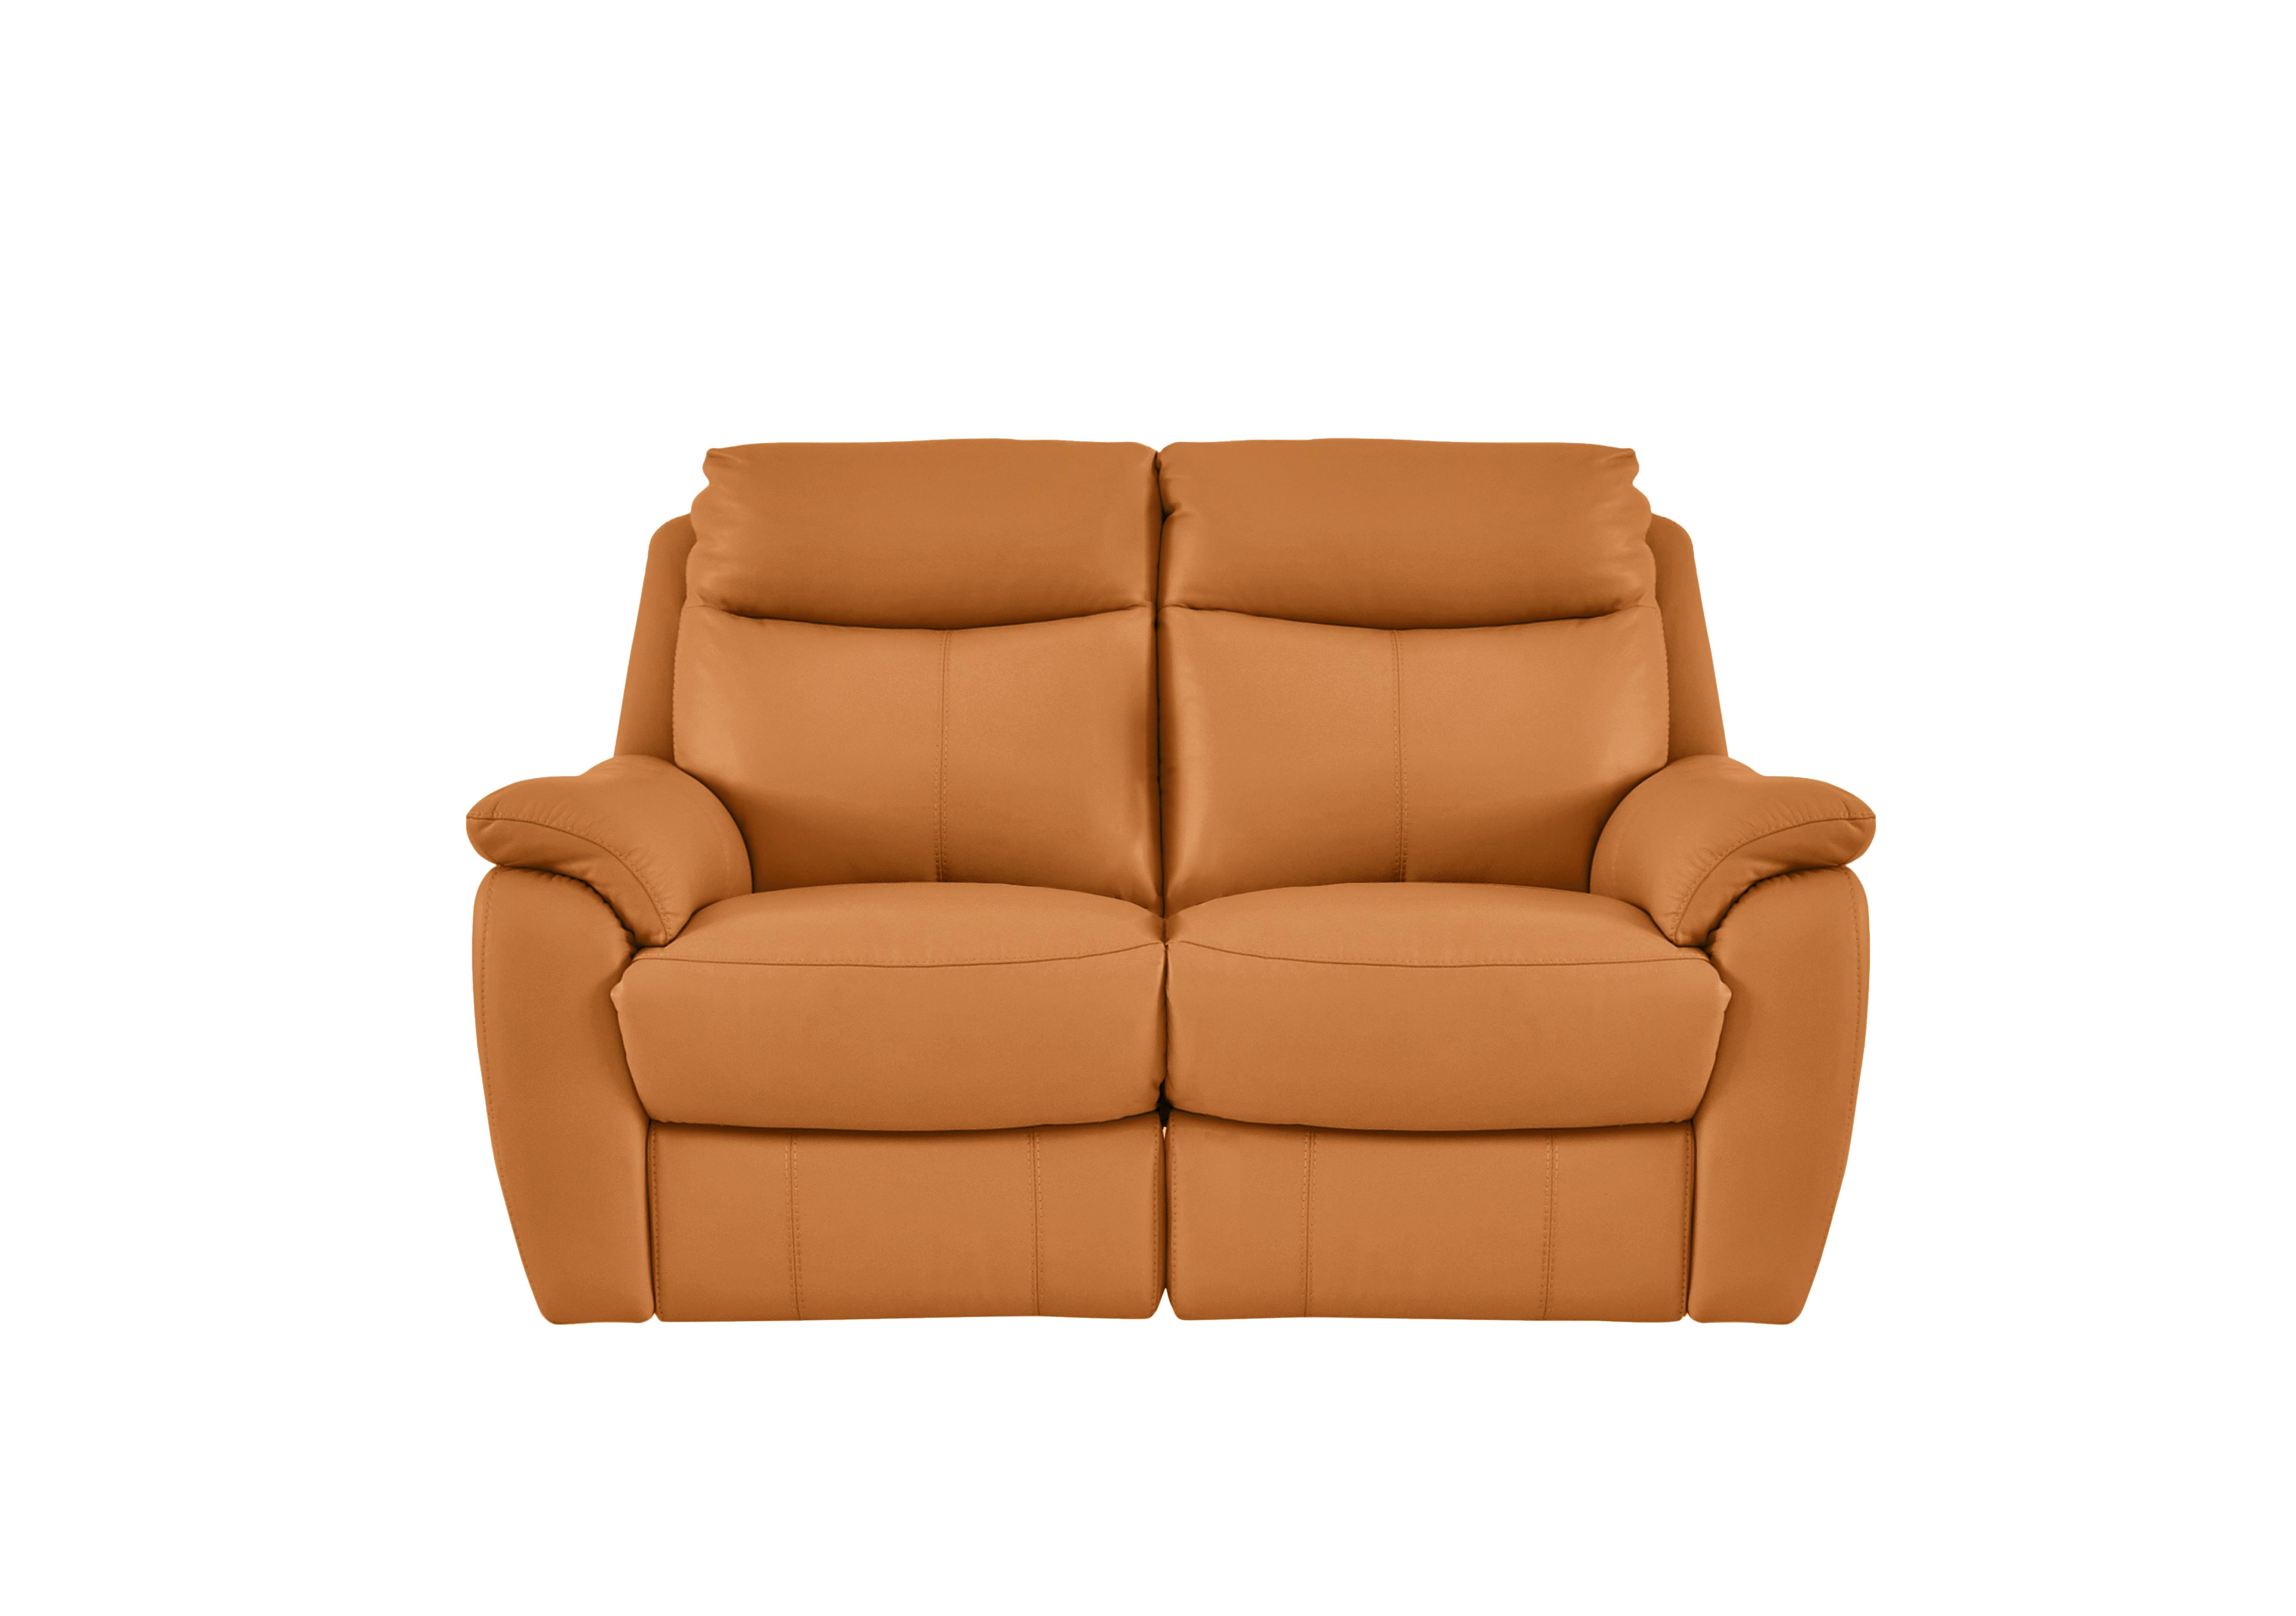 Snug 2 Seater Leather Sofa in Bv-335e Honey Yellow on Furniture Village